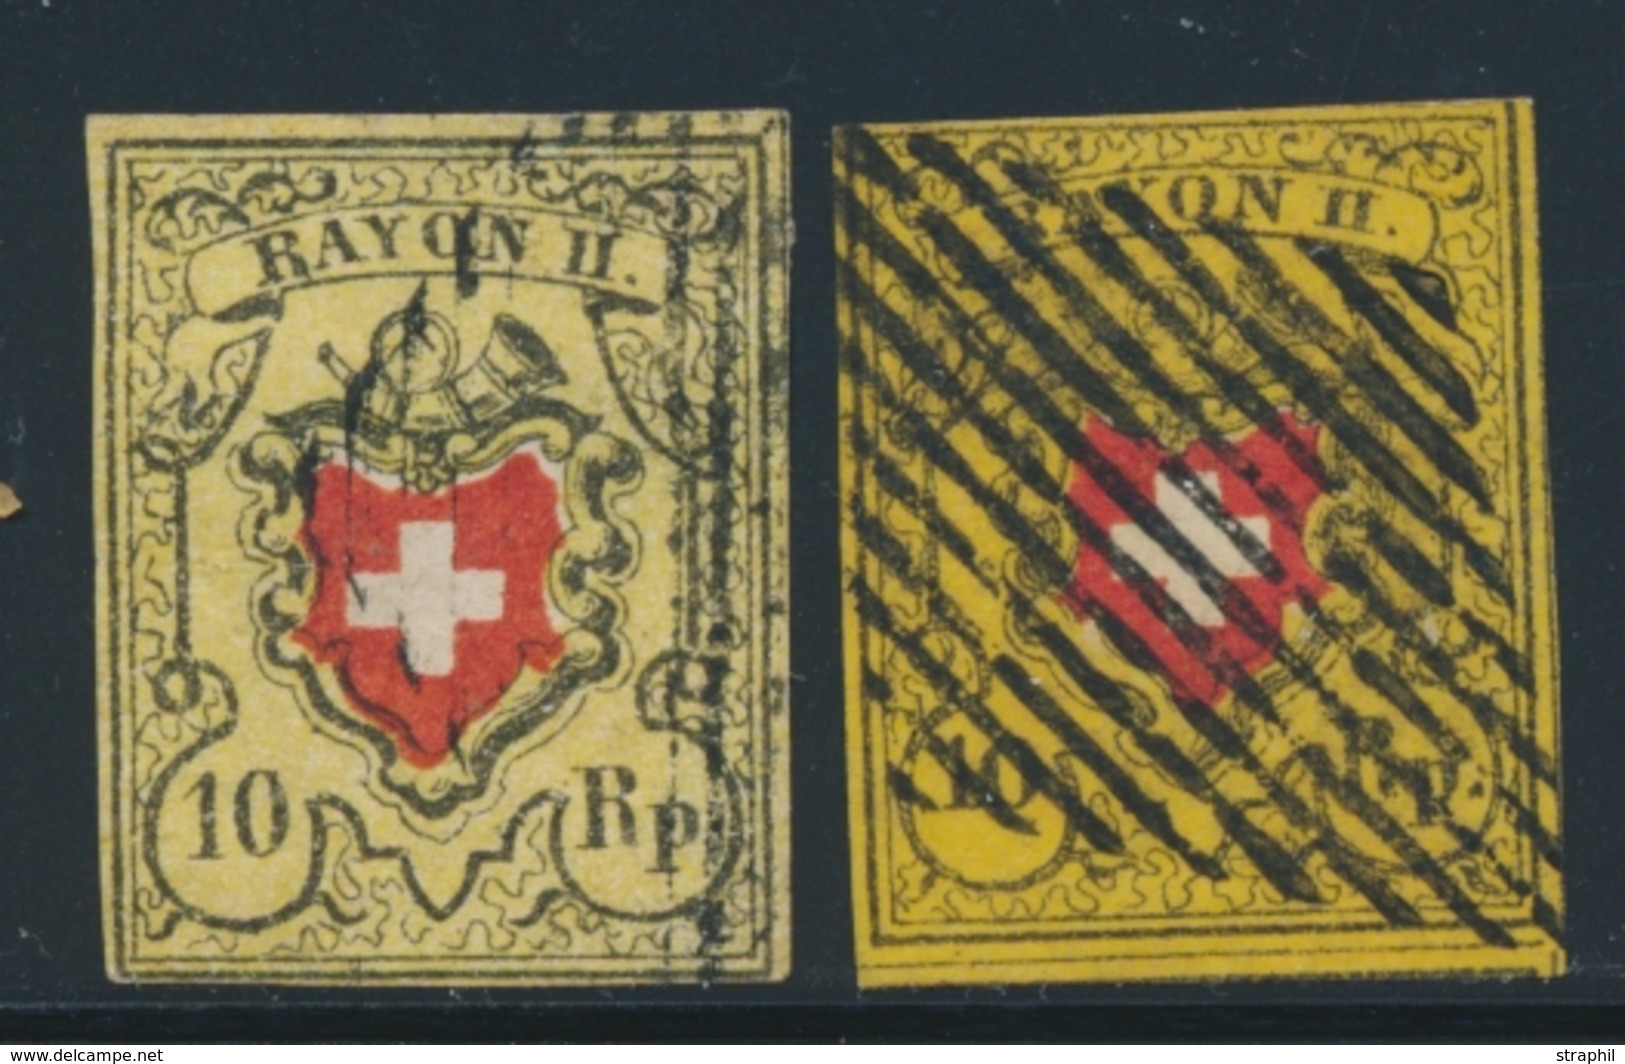 O SUISSE - O - N°15, N°15A -signé A. Brun - TB - 1843-1852 Federal & Cantonal Stamps